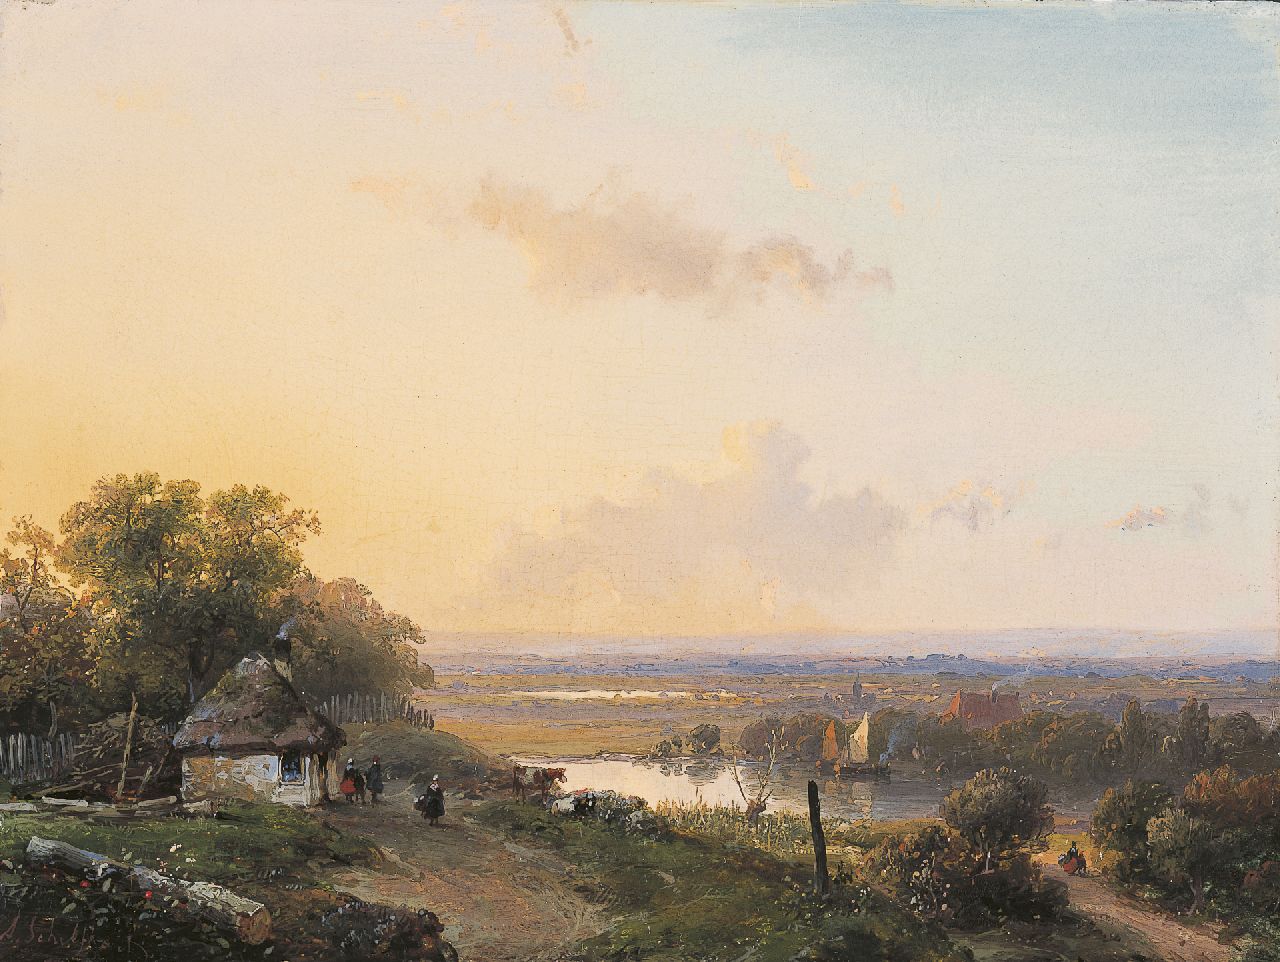 Schelfhout A.  | Andreas Schelfhout, Figures on a path in a panoramic landscape, oil on panel 19.0 x 25.5 cm, signed l.l. and painted circa 1850